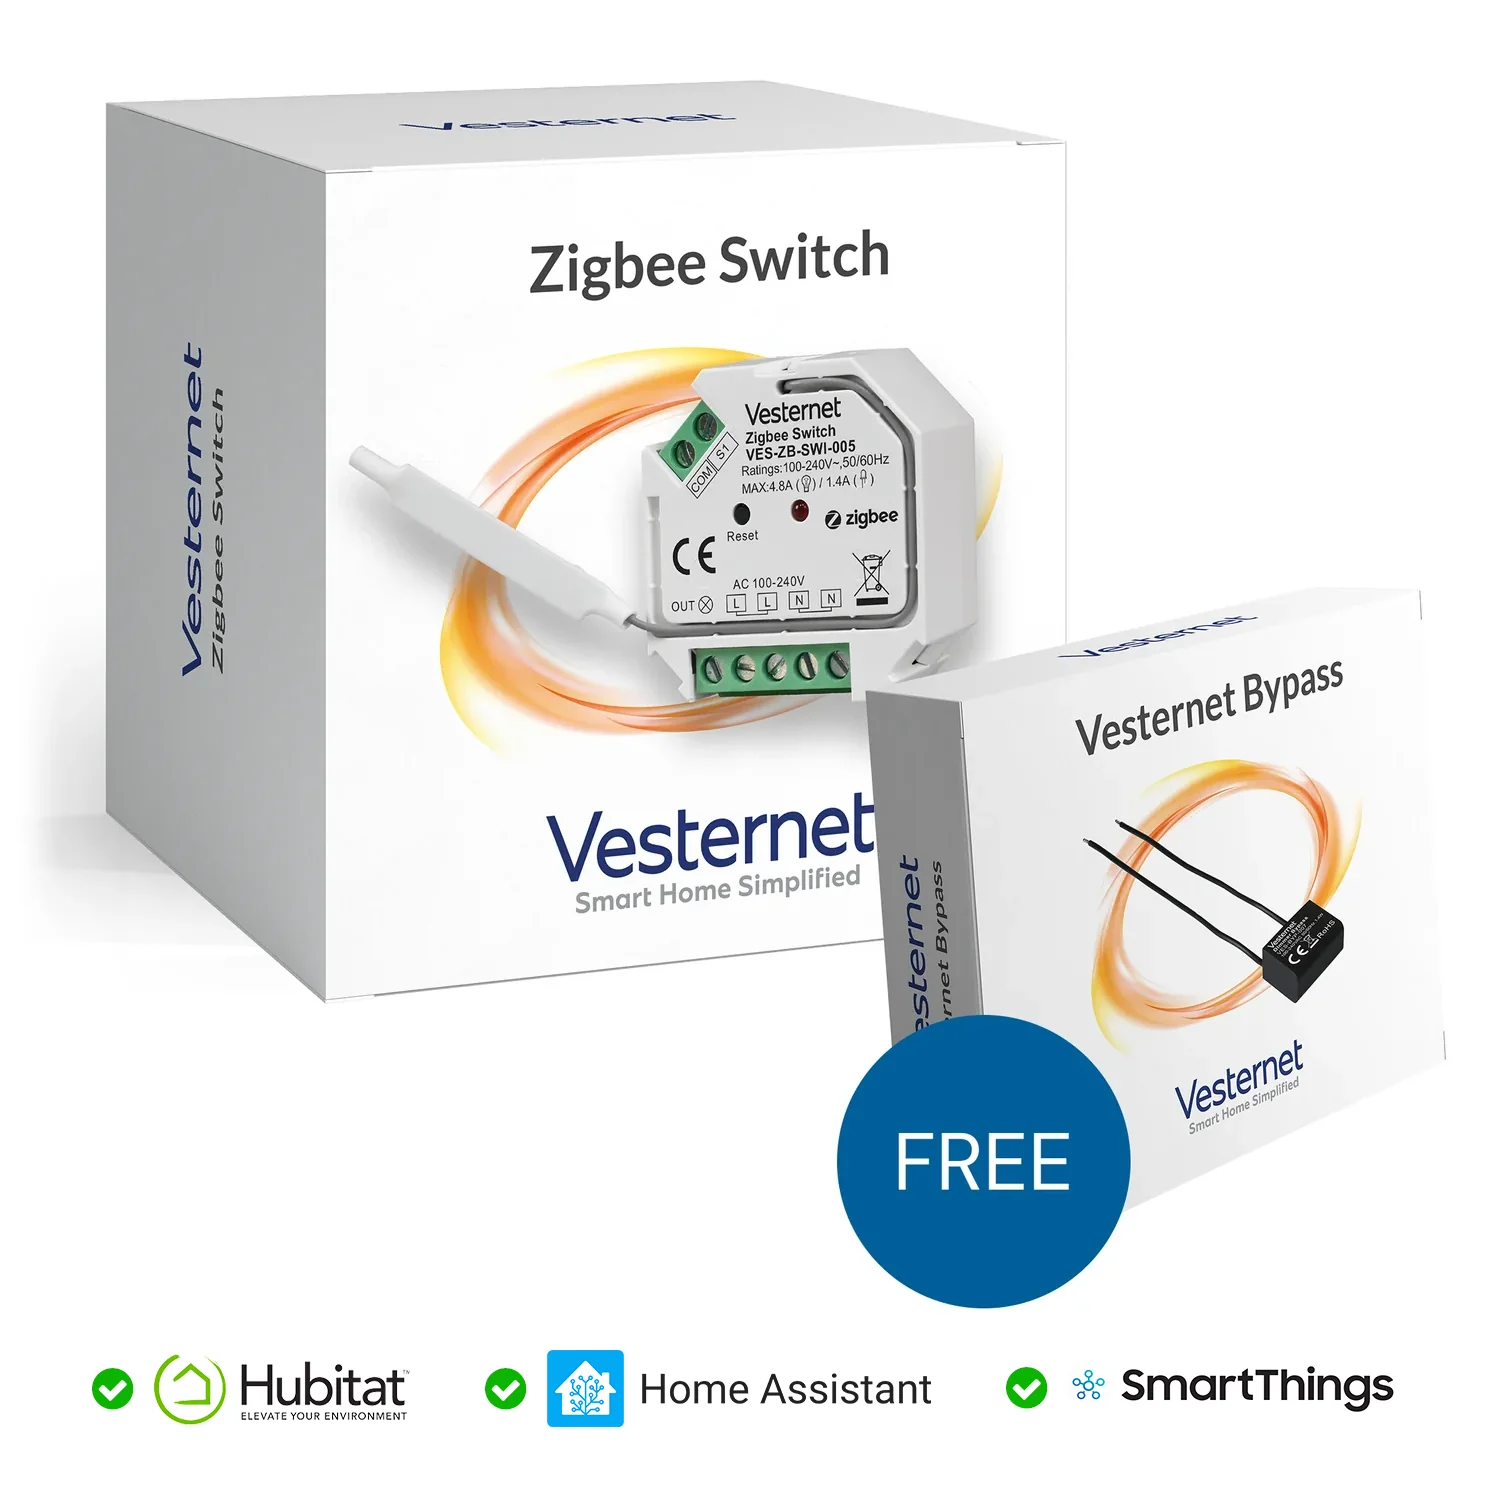 Vesternet zigbee switch/dimmer - Compatibility with hue bulbs?